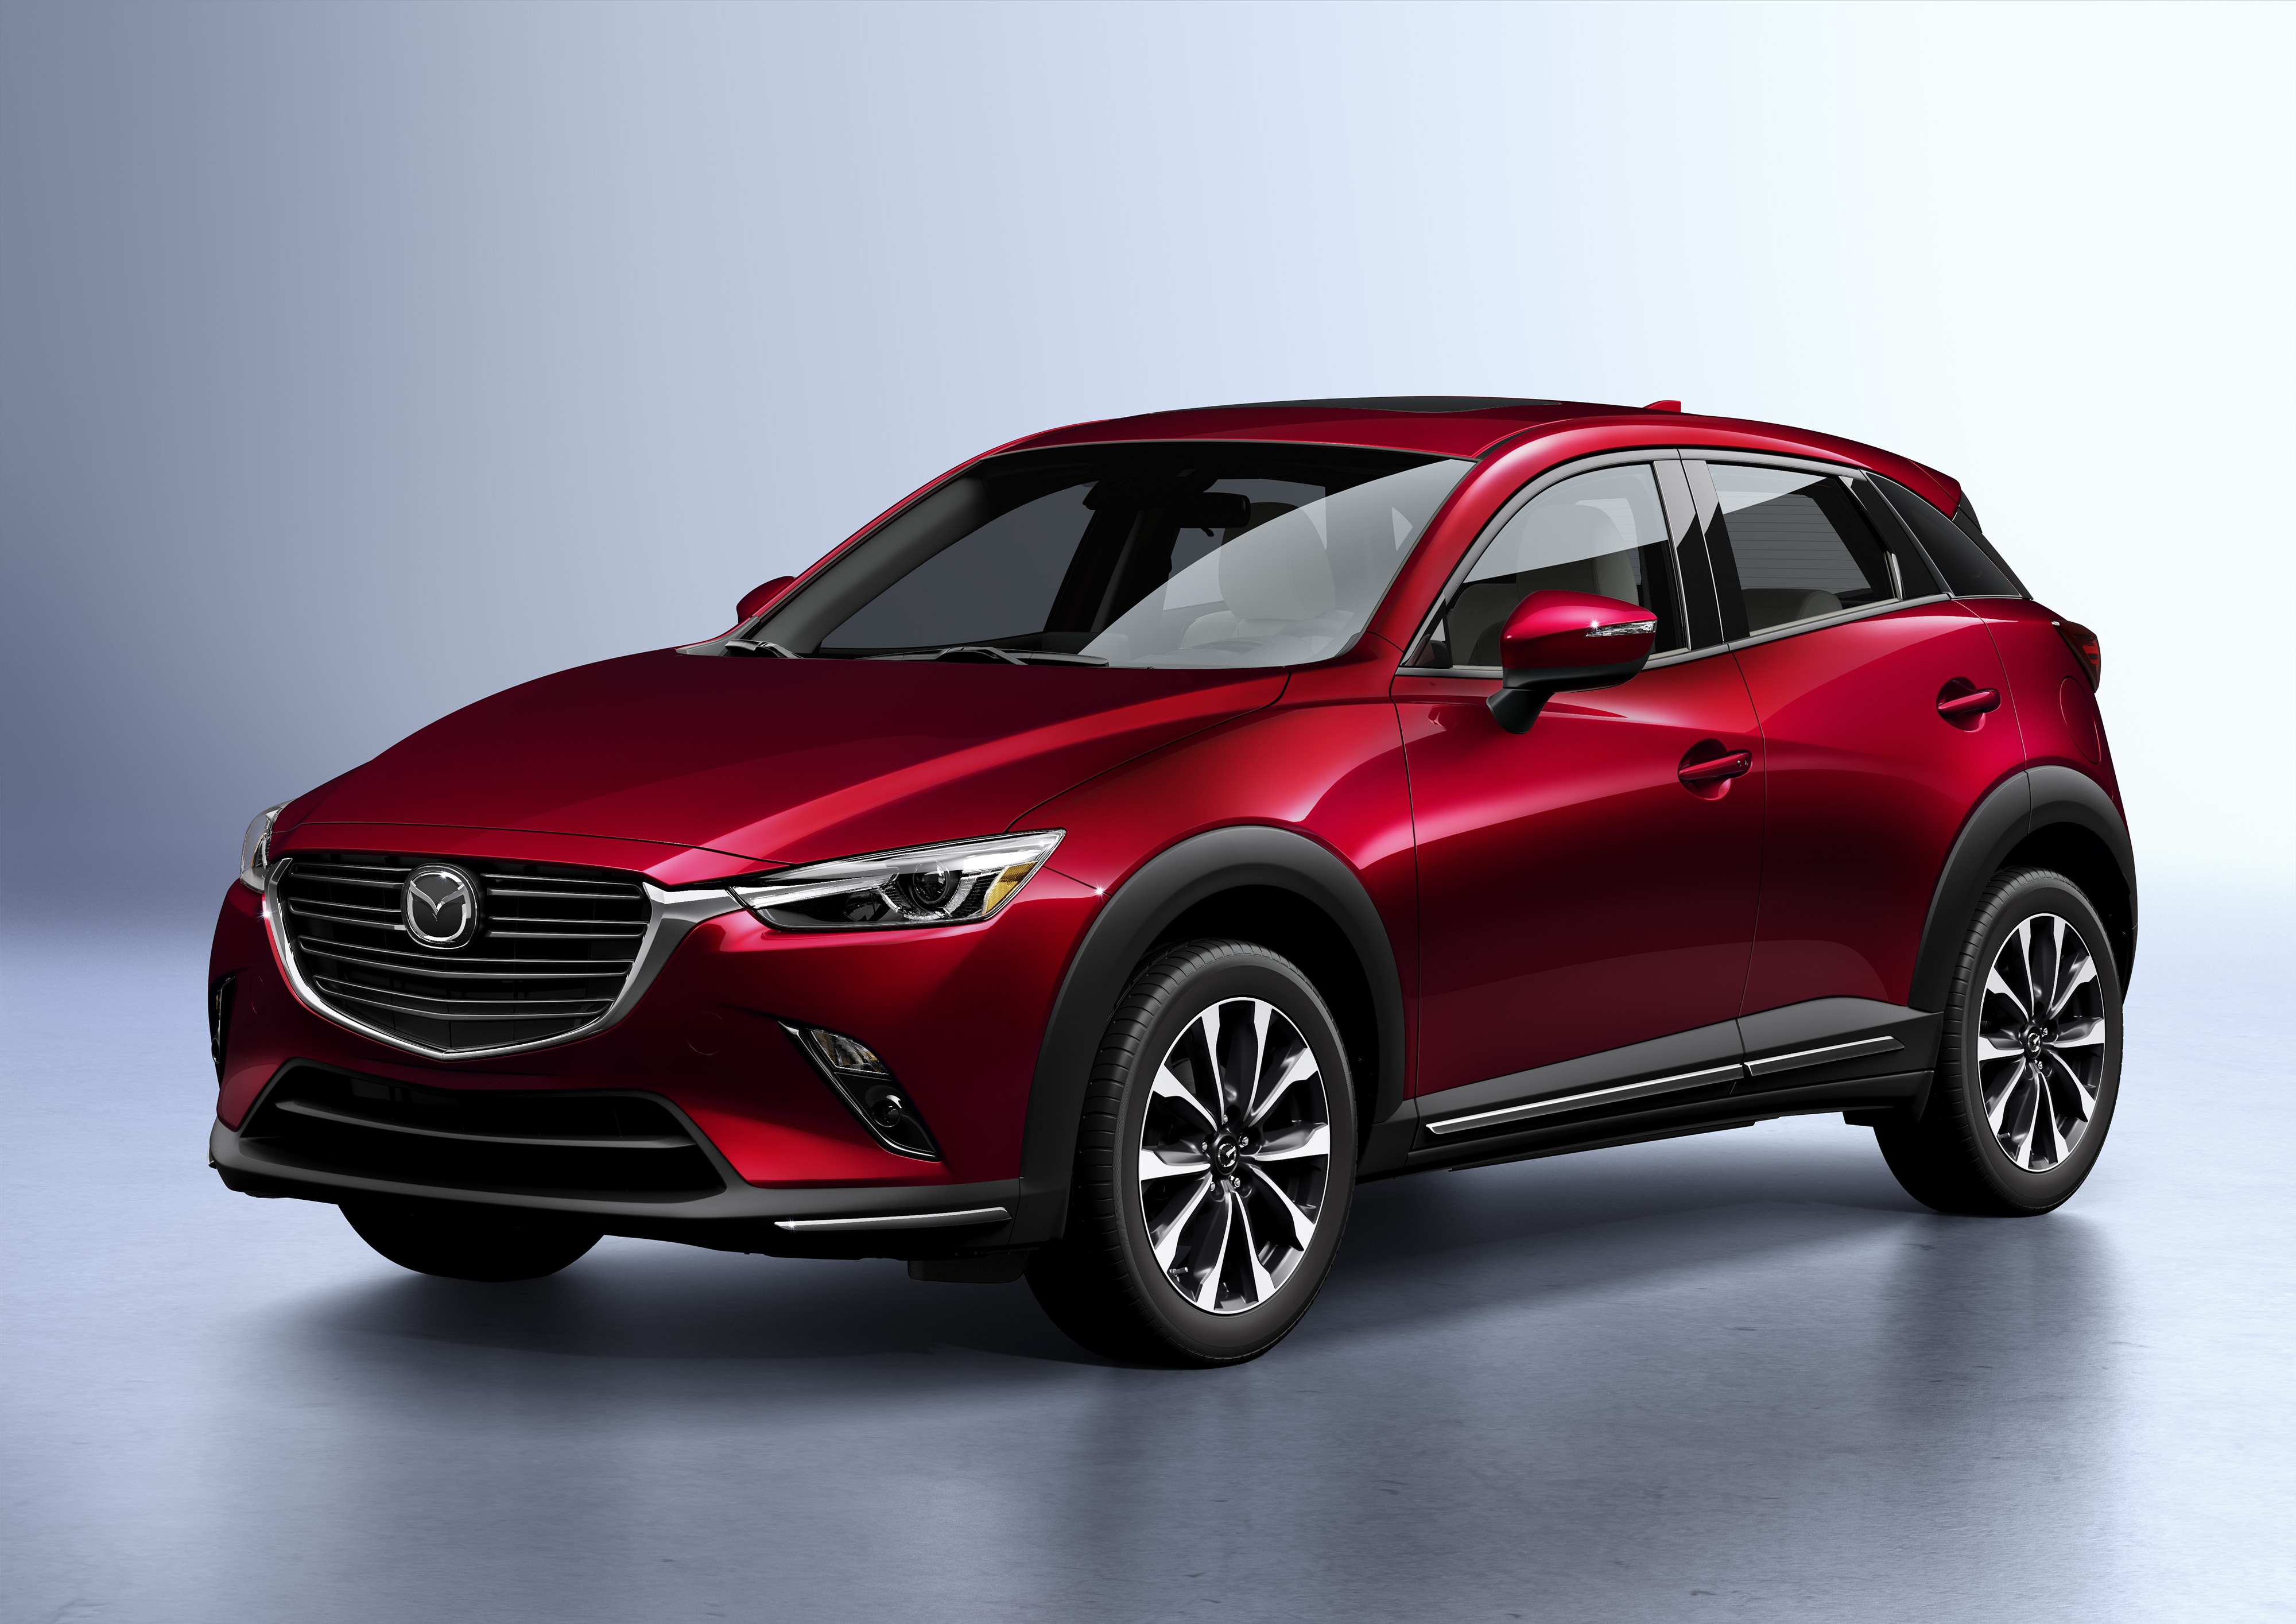 2019 mazda cx-3 full view front